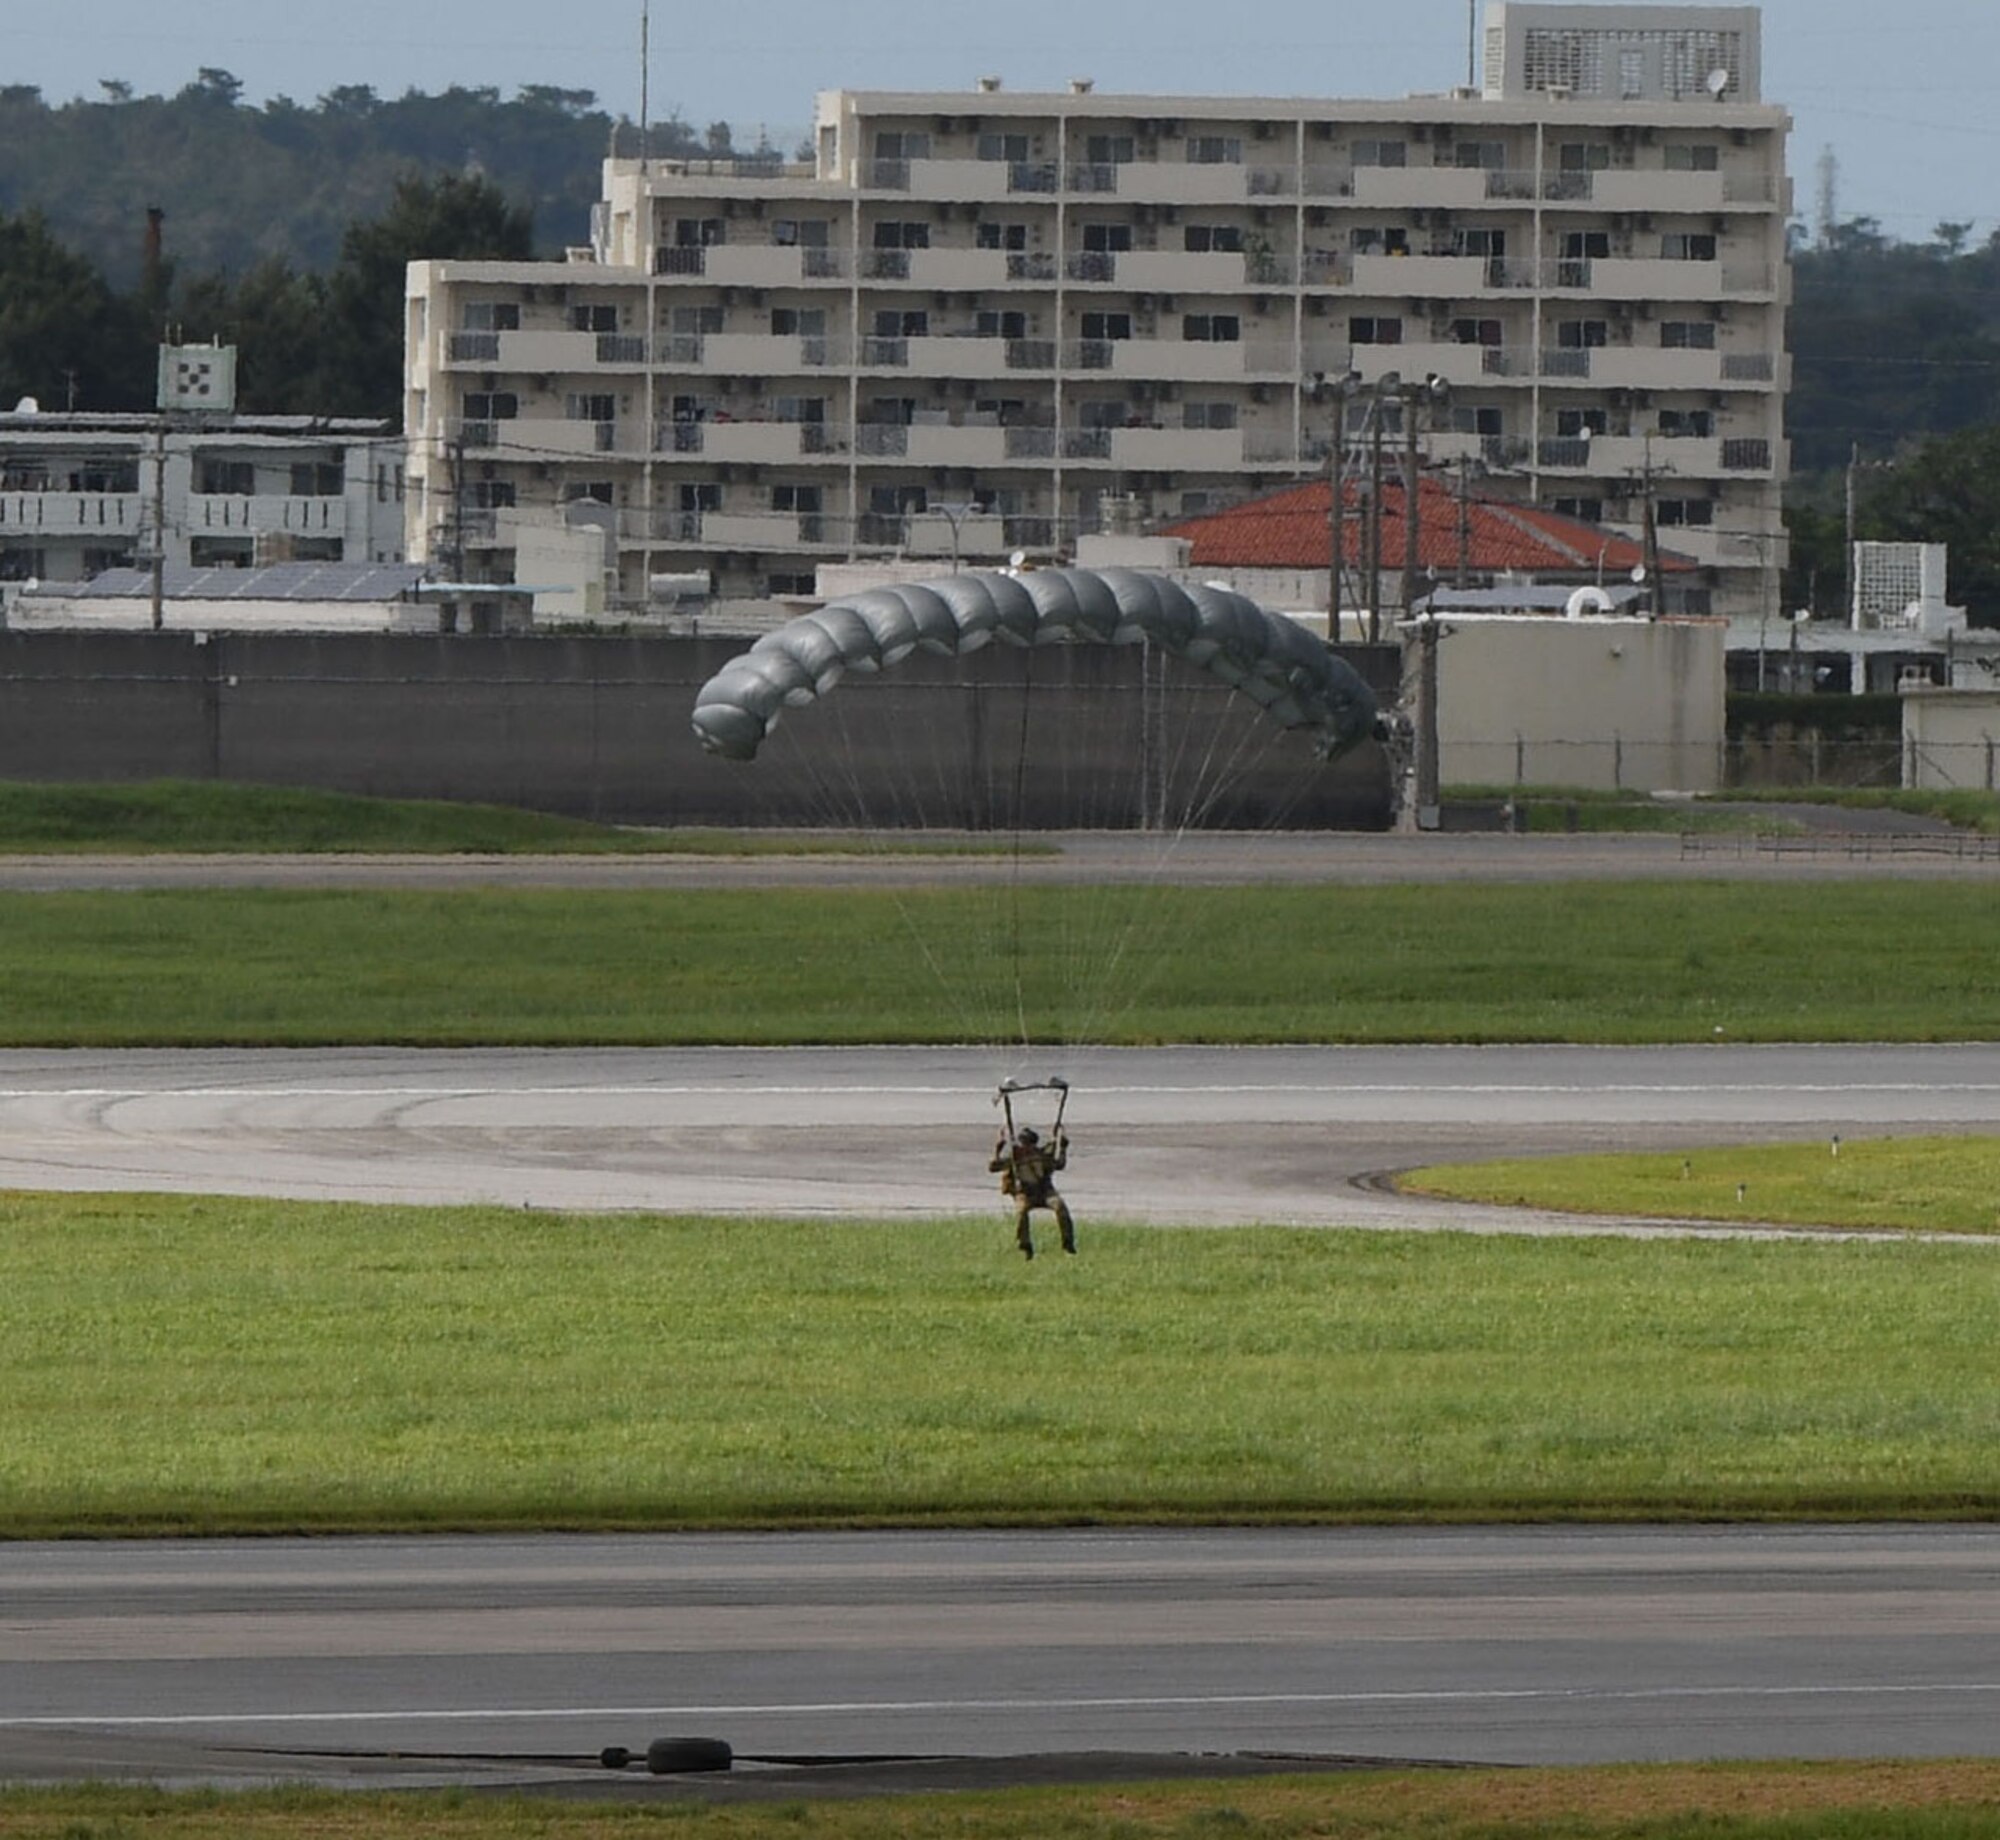 Air Force servicemembers conduct paradrop training at the Ridout drop zone July 9, 2020, on Kadena Air Base, Japan. All training on Kadena AB is conducted in accordance with bilateral agreements between the United States and the Government of Japan. Ie Jima is the primary location for overland U.S. military paradrop training in Okinawa. The bilateral agreements allow for the use of Kadena AB as an alternate location when Ie Jima is not available to meet the immediate training needs of U.S. forces.